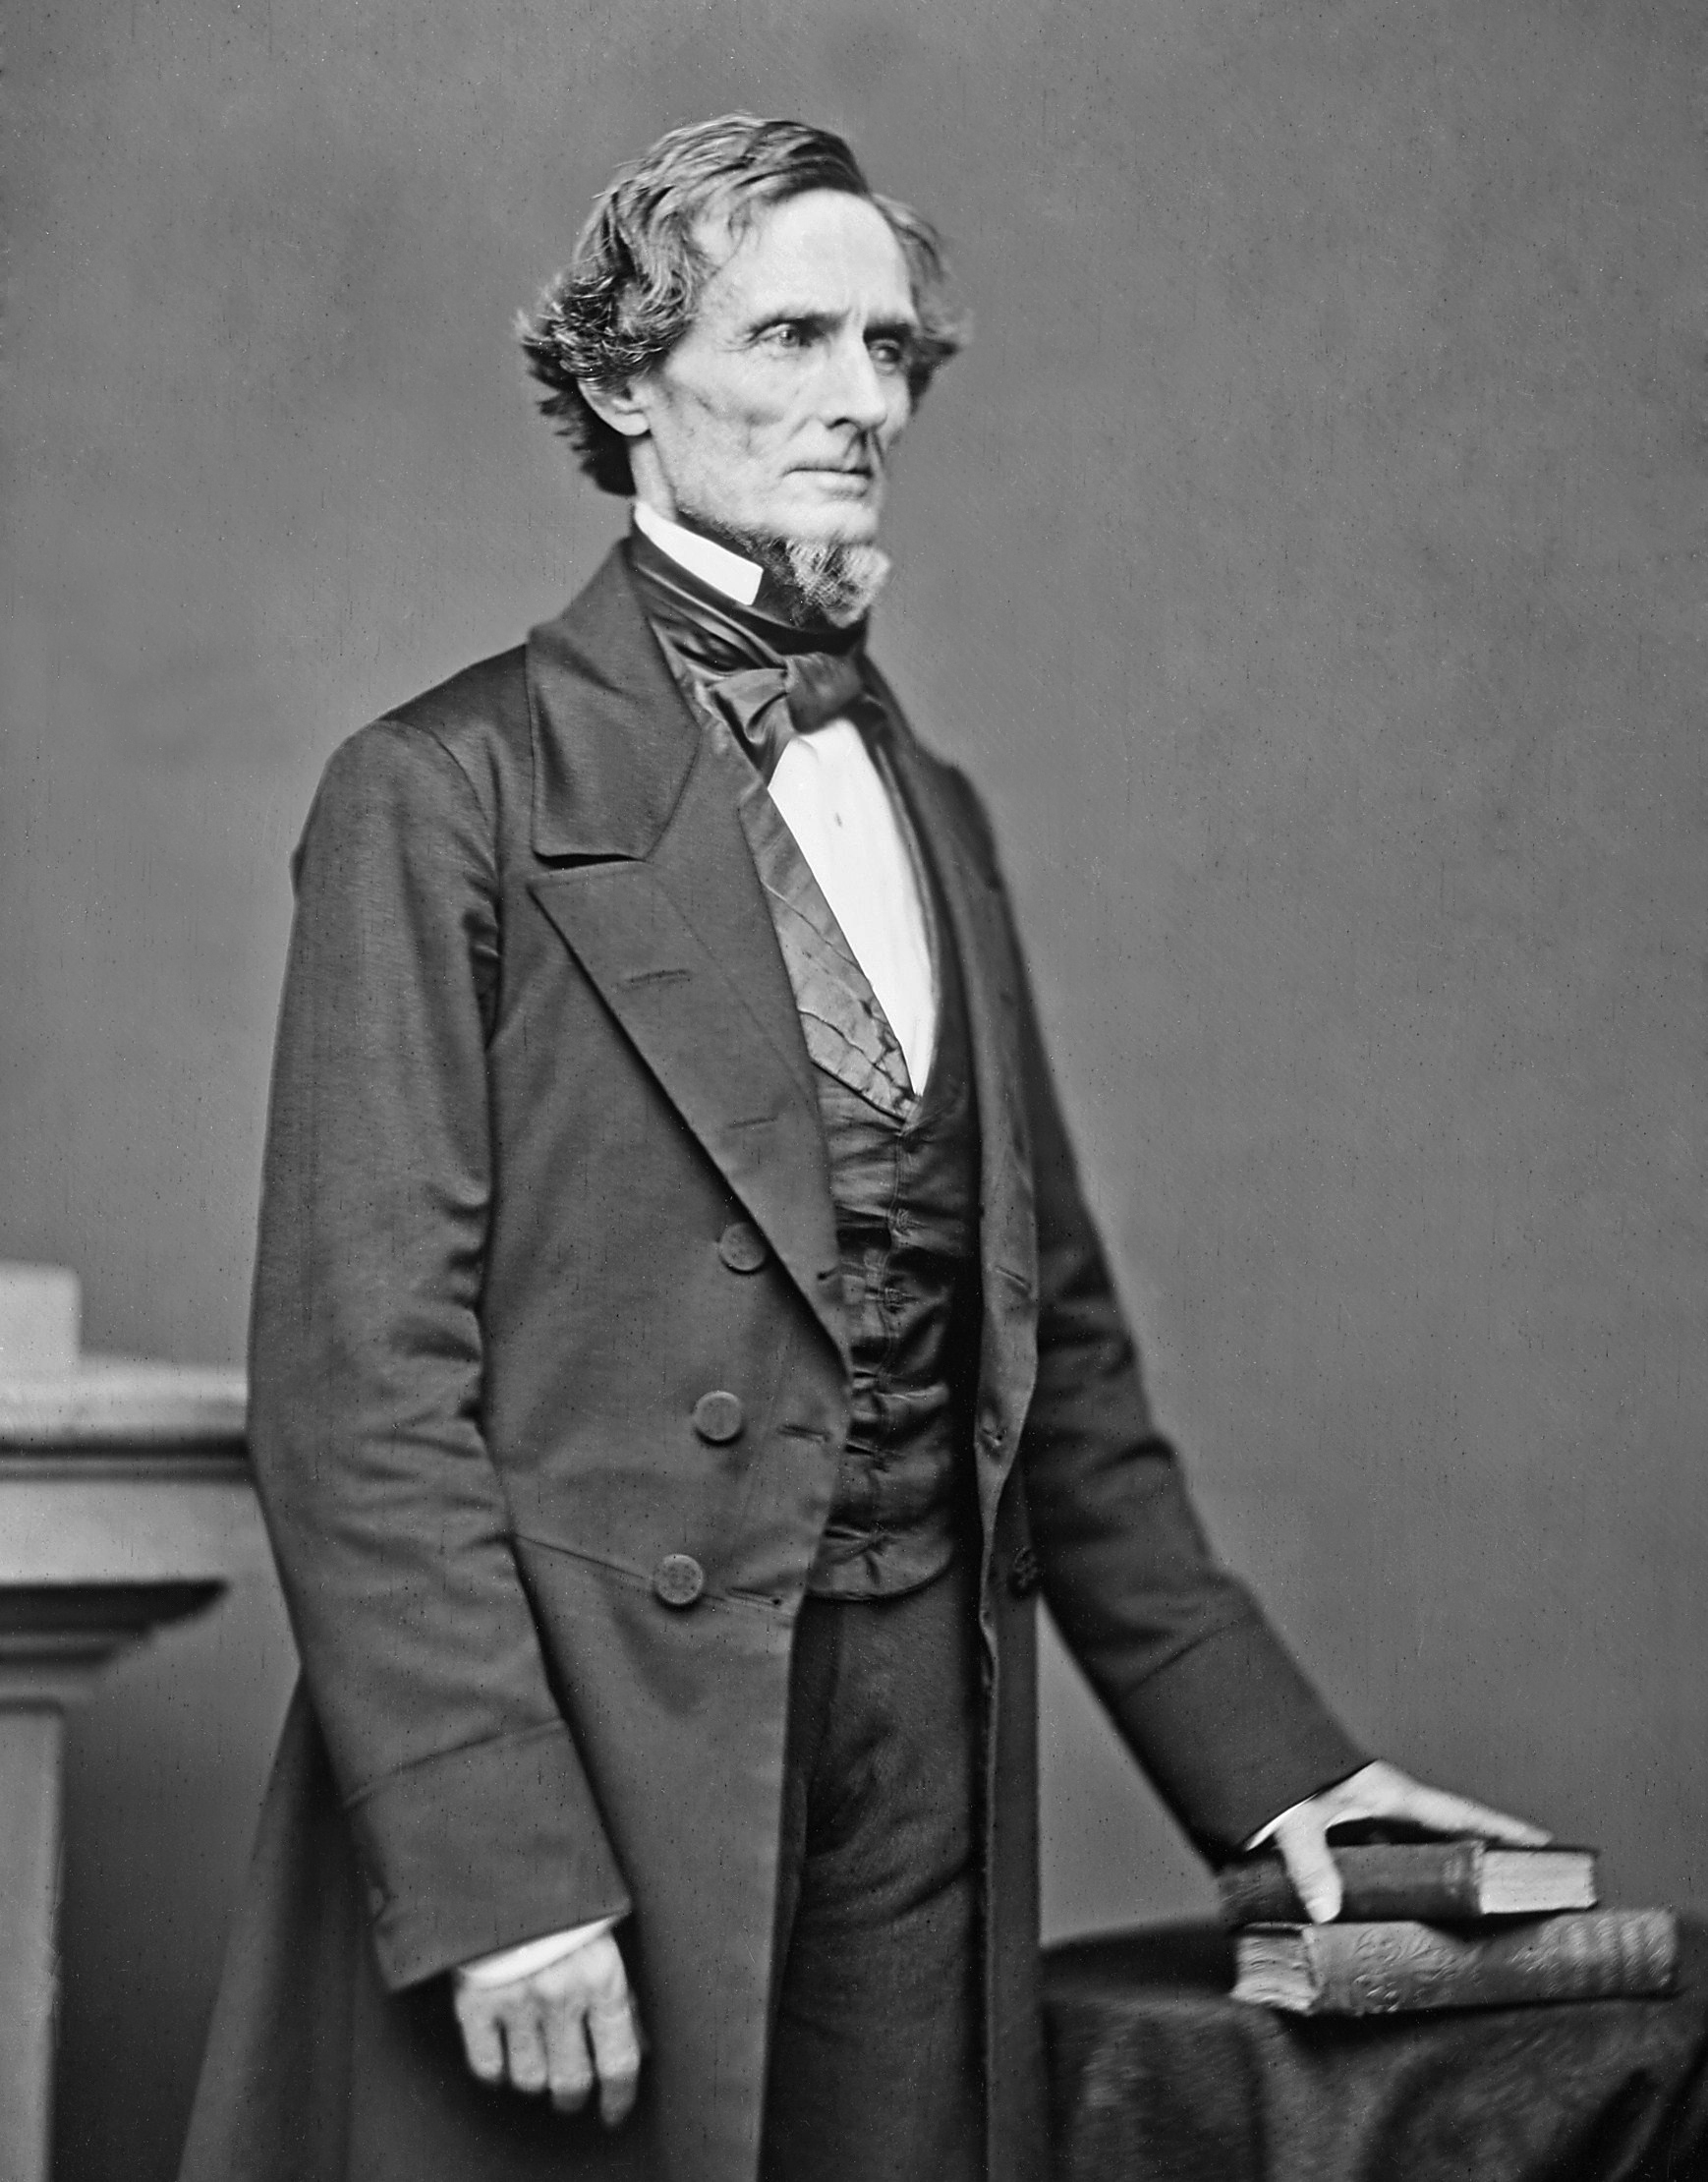 1861 Jefferson Davis was elected as president of the Confederate States of America